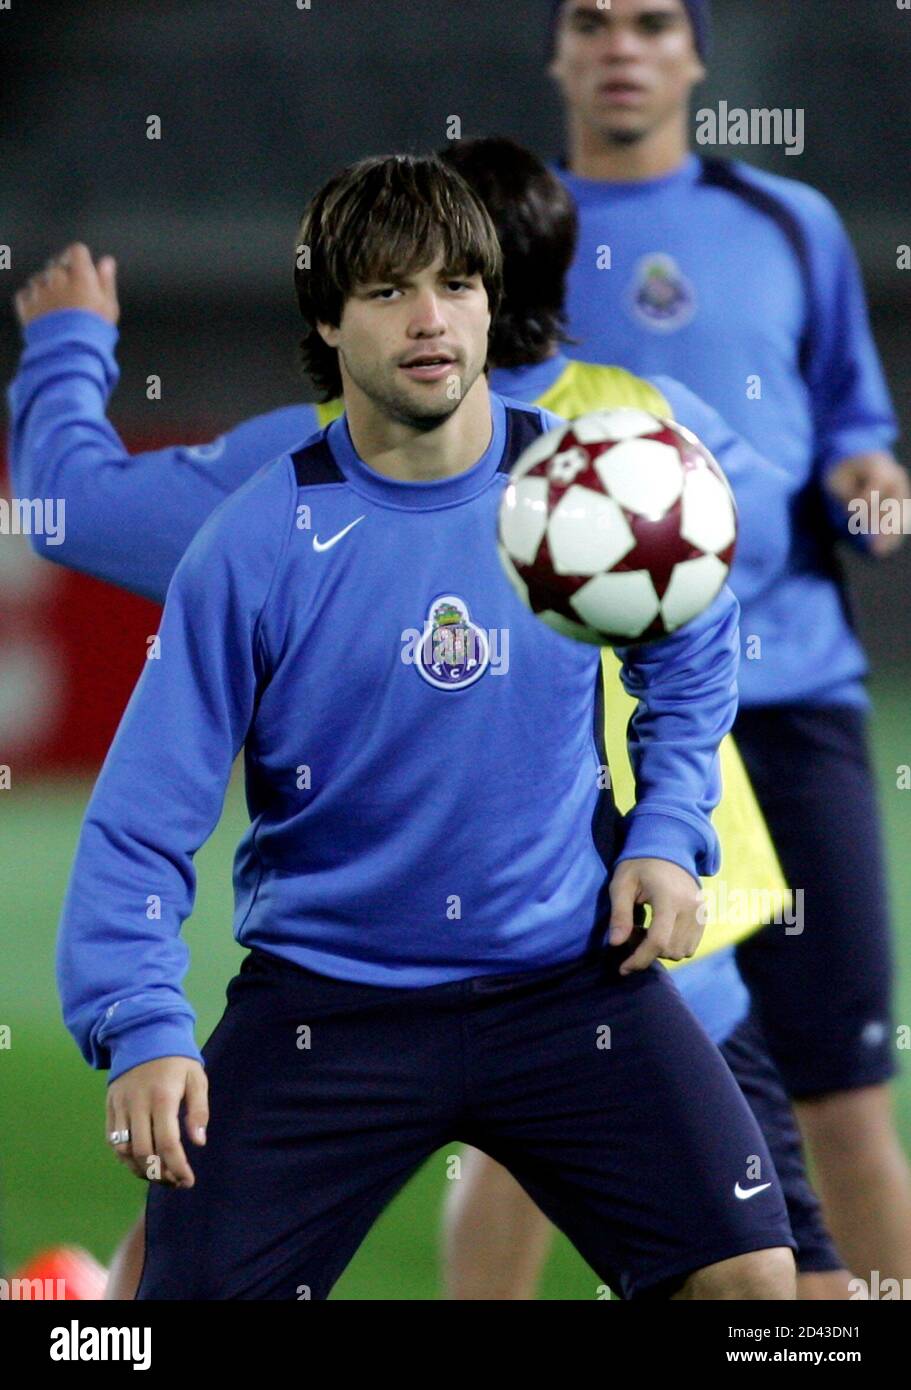 Portuguese FC Porto's midfielder Diego Ribas da Cunha of Brazil controls the ball during a practice session at Yokohama International stadium in Yokohama, south of Tokyo, December 11, 2004. The FC Porto is in Japan for the European-South American Cup club soccer championship against South-American club champion Once Caldas of Colombia on Sunday. REUTERS/Issei Kato  IK/FA Stock Photo